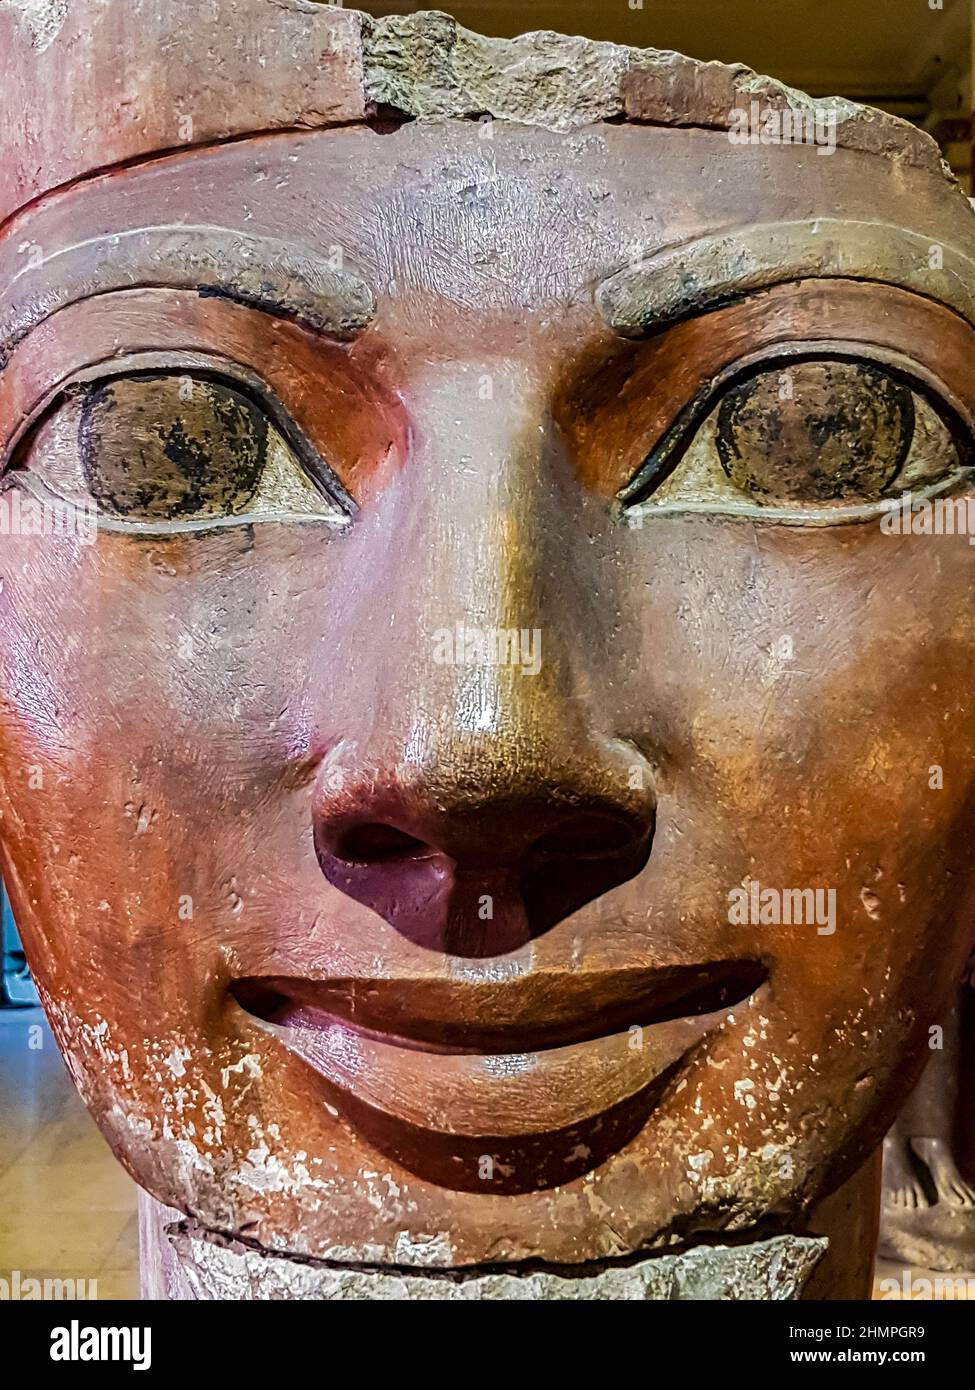 Cairo, Egypt - December 17, 2021: Statue of Hatshepsut at Egyptian Museum in Cairo, Egypt. It is founded at 1902 and have more than 120.000 ancient Eg Stock Photo